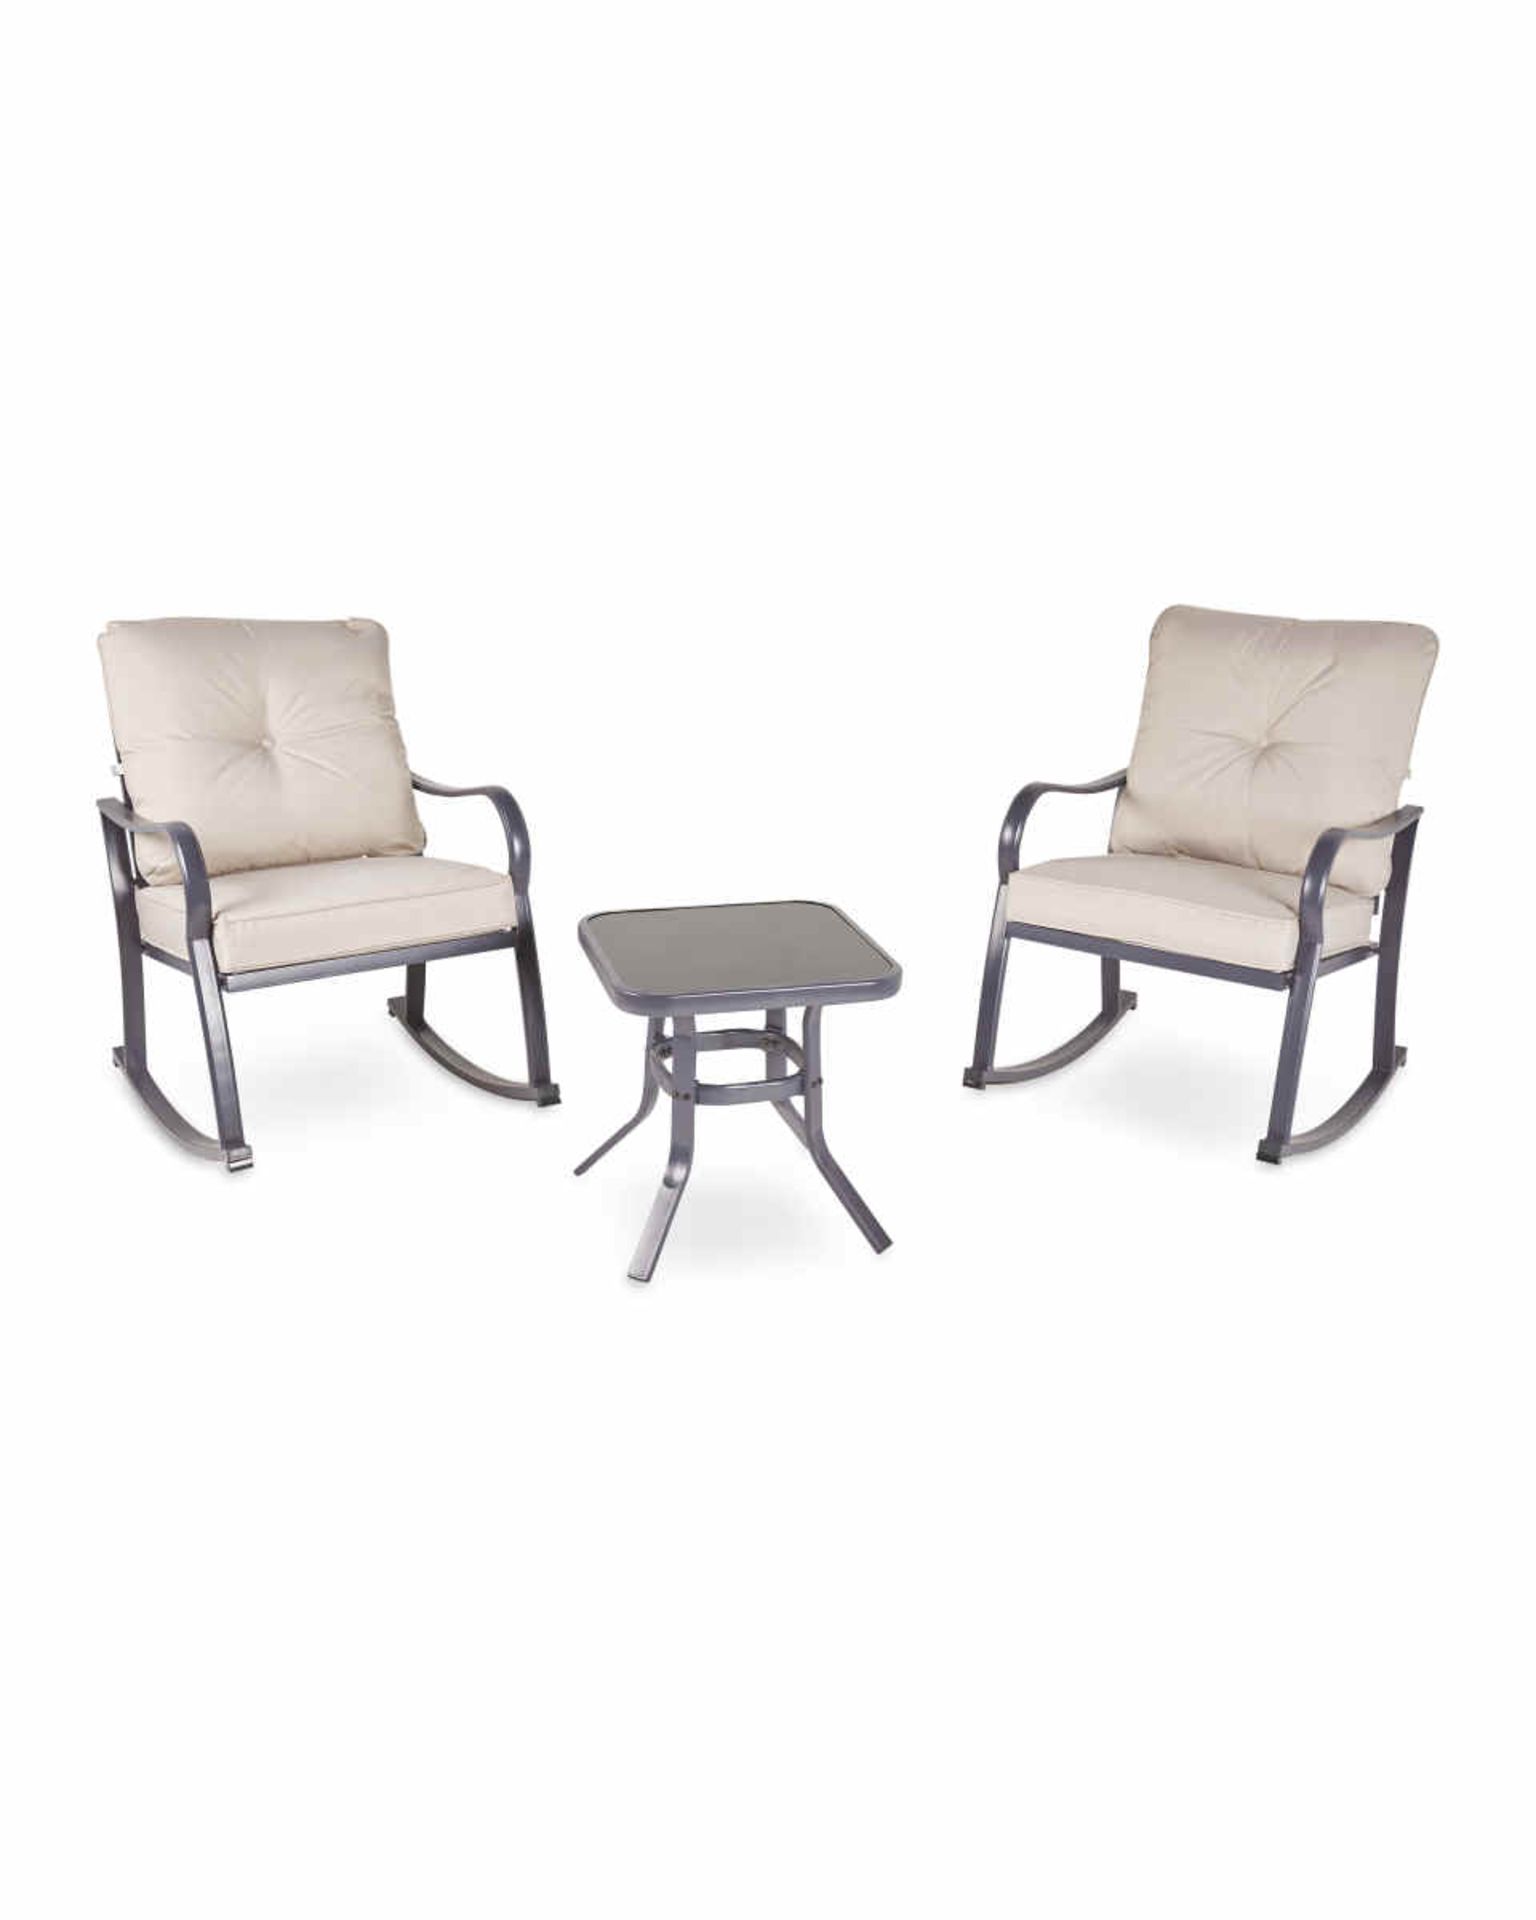 Luxury Rocking Bistro Set. Sit back and rock away in style with this stunning Luxury Rocking - Image 2 of 2